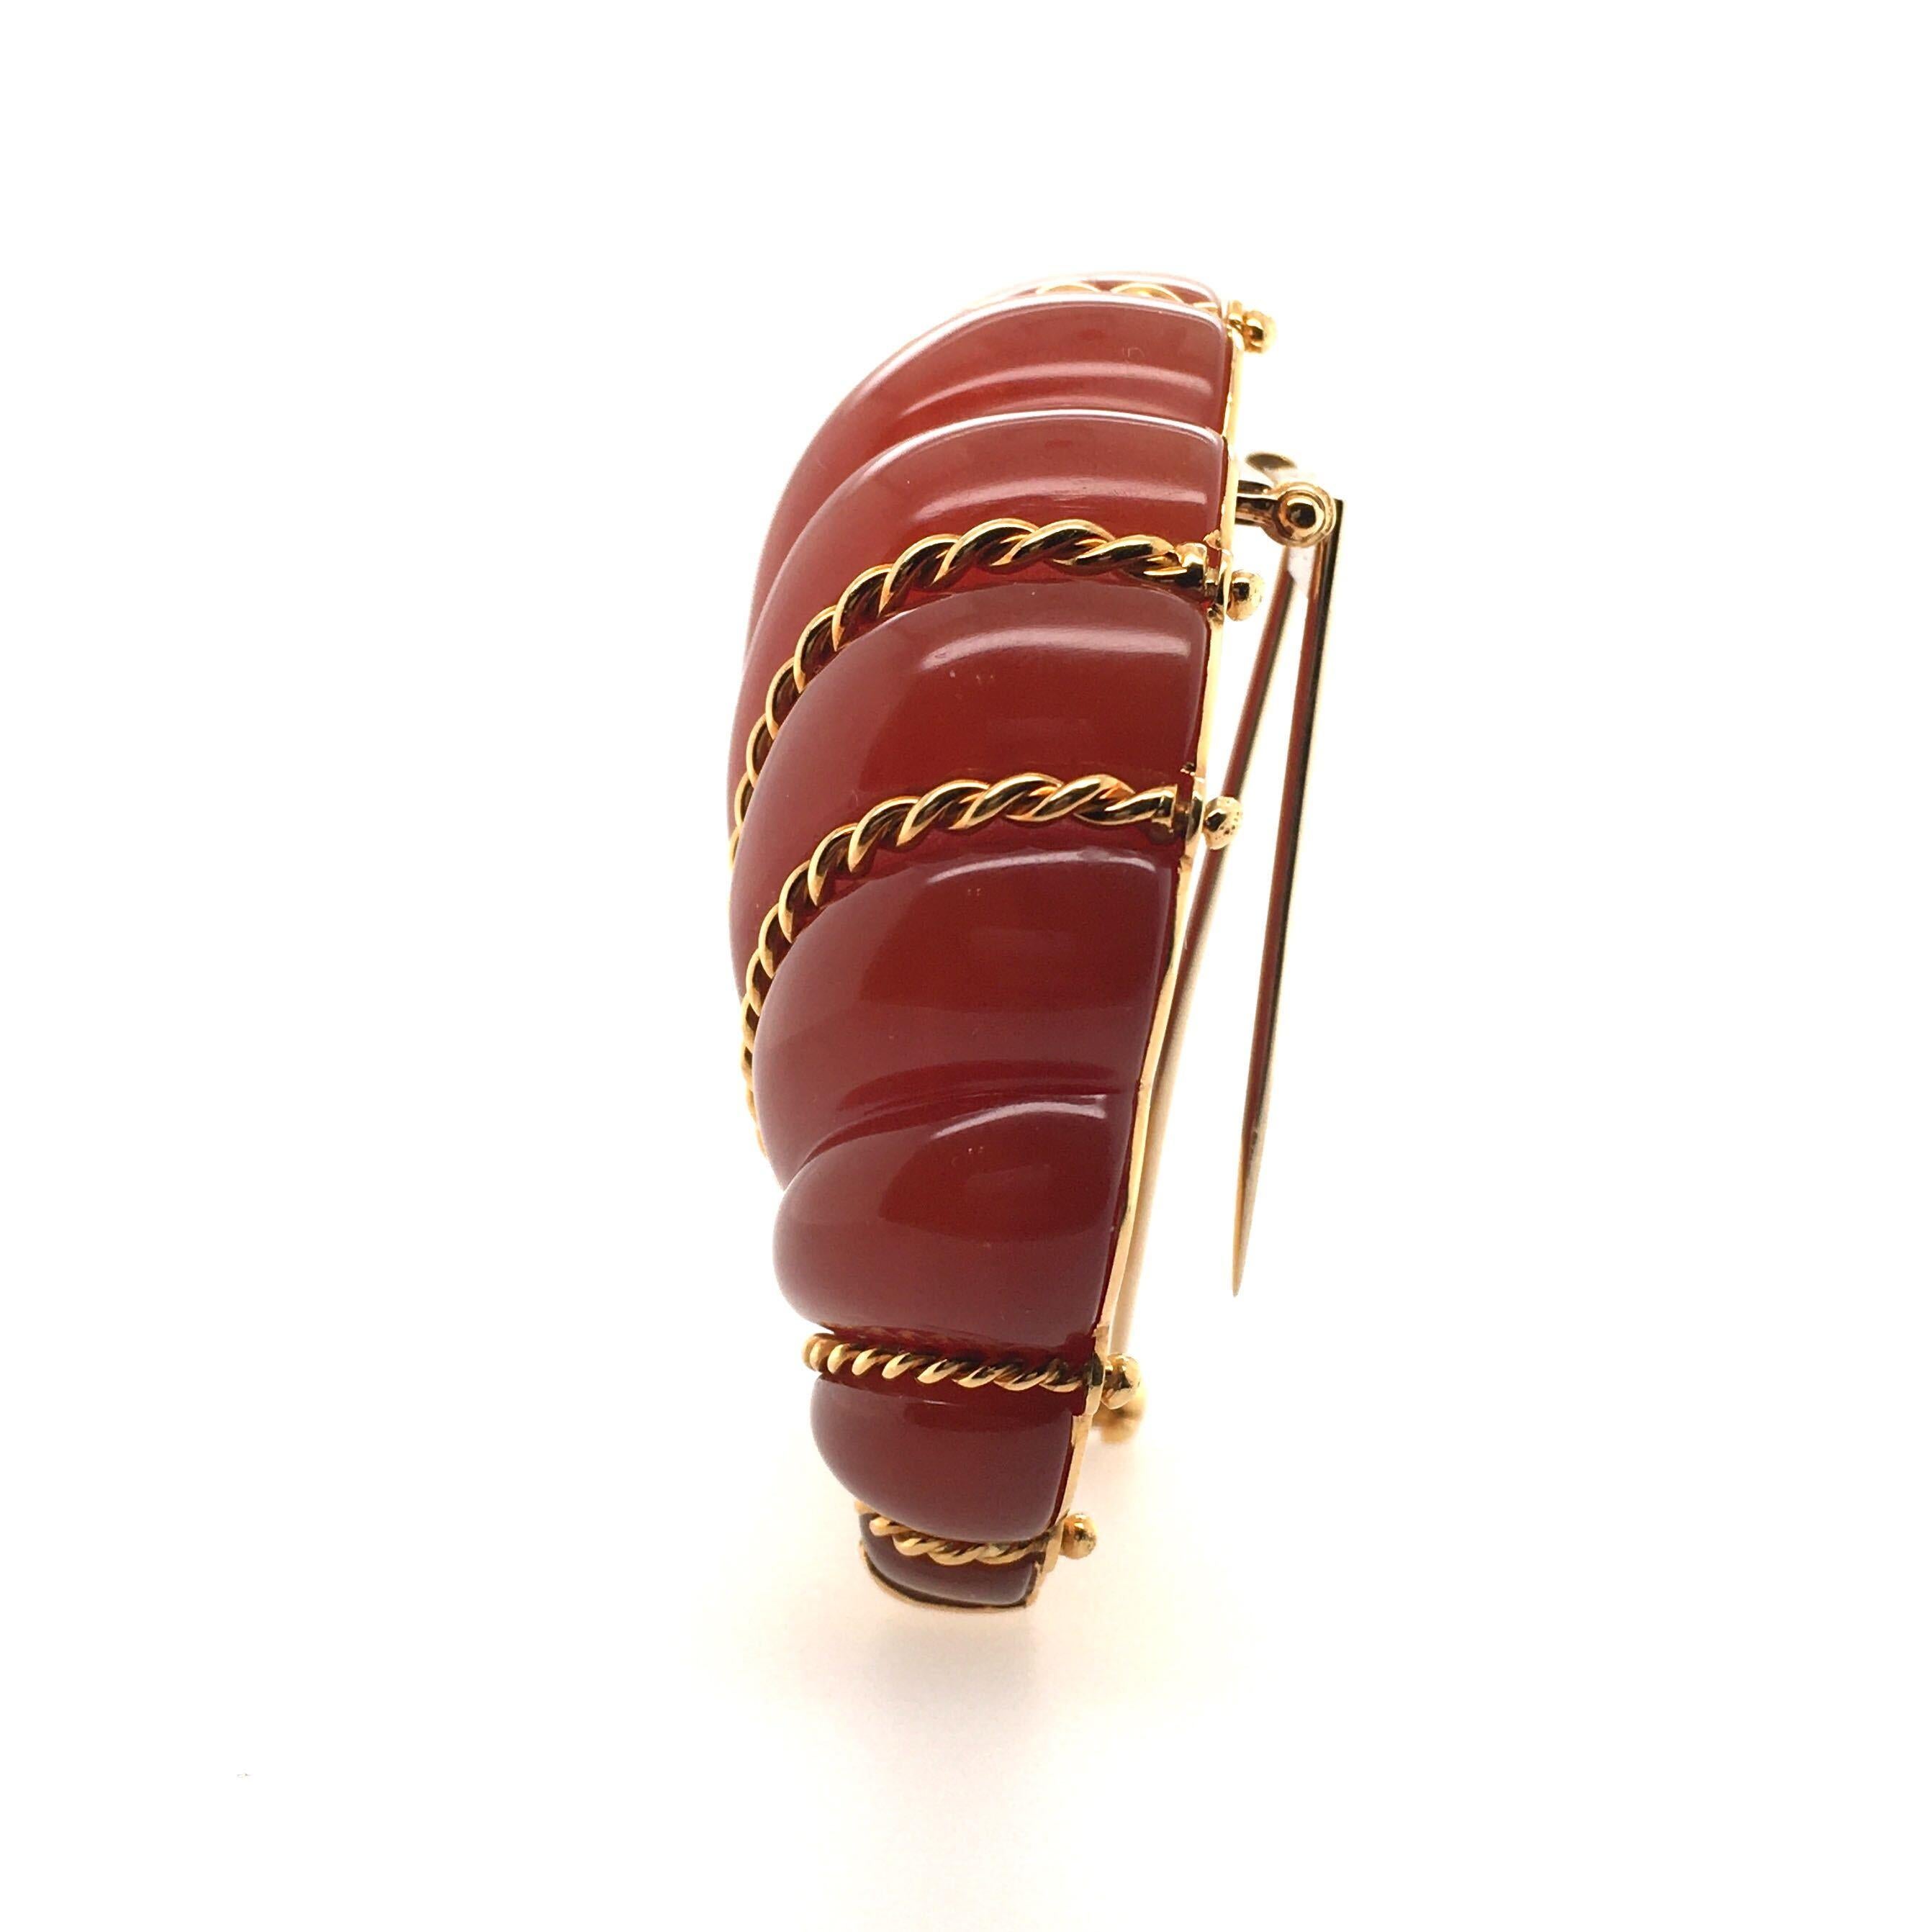 An 18 karat yellow gold and carnelian Fan brooch. Seaman Schepps. Designed as a carved carnelian fan shaped plaque, enhanced by gold ropework detail. The brooch measures approximately 2 1/2 x 1 inches, gross weight is approximately 67.3 grams.